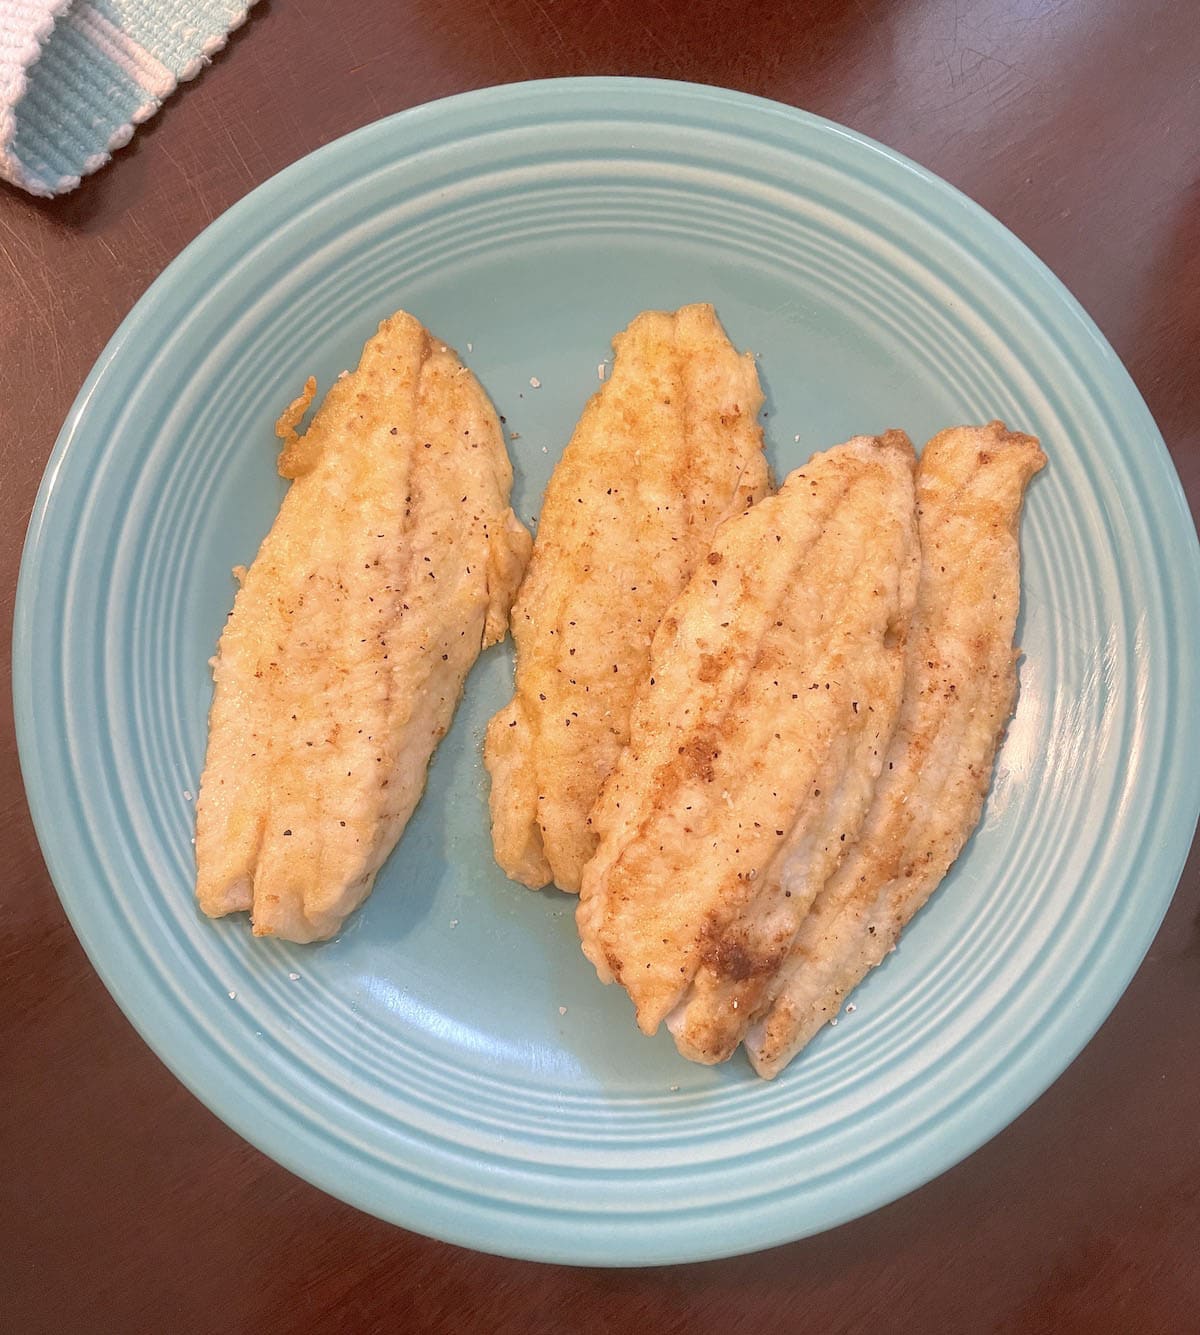 Four pan fried trout fillets on a blue plate.